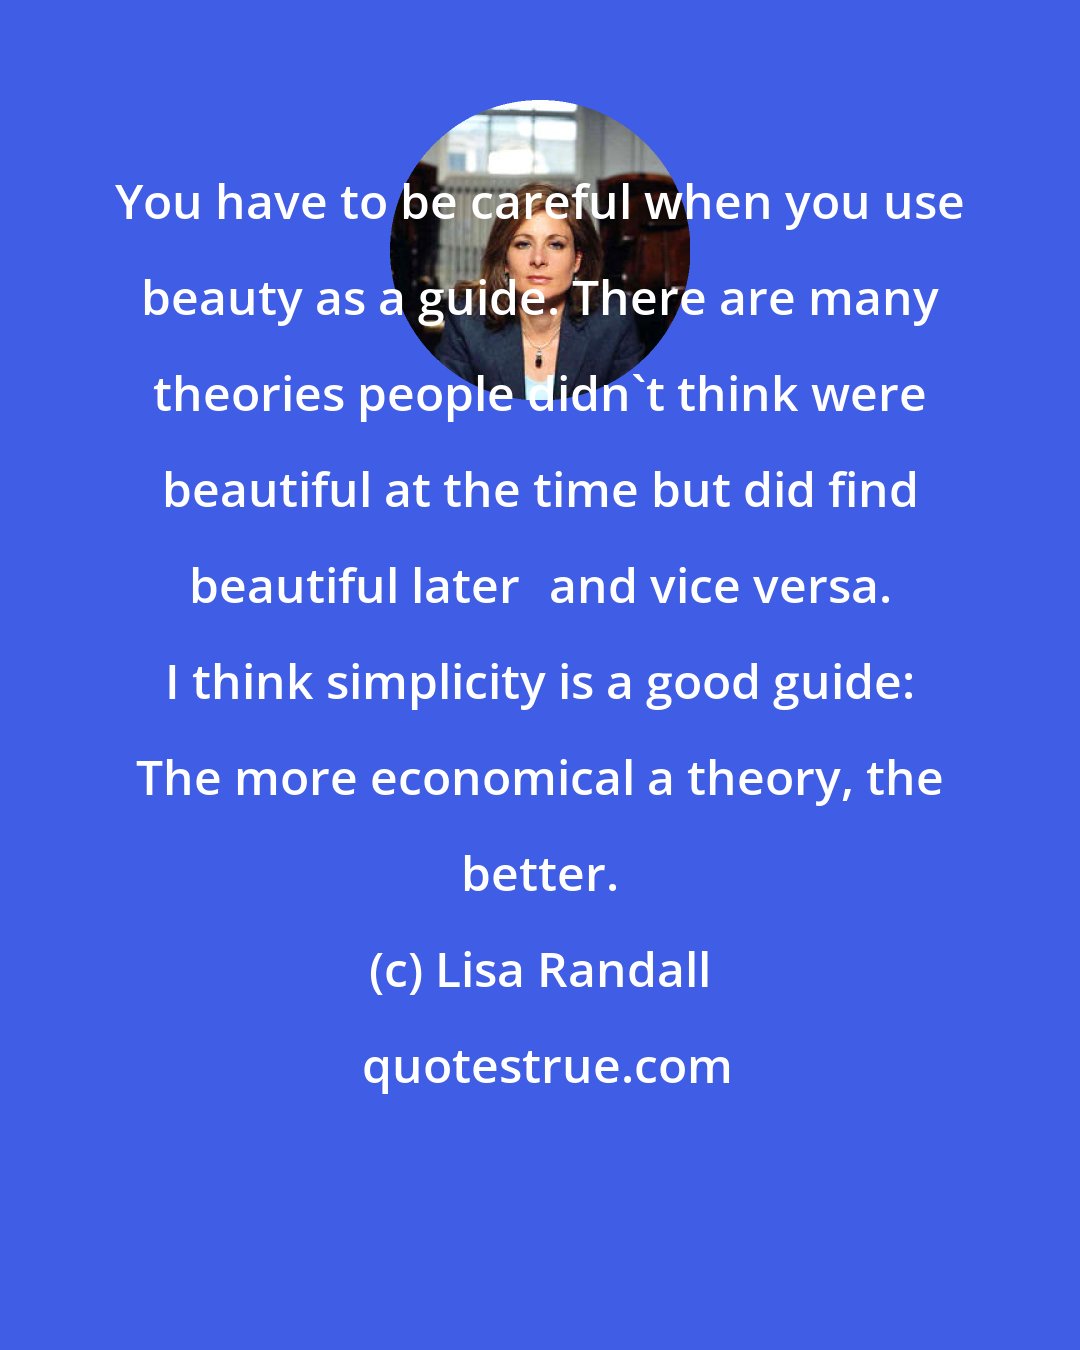 Lisa Randall: You have to be careful when you use beauty as a guide. There are many theories people didn't think were beautiful at the time but did find beautiful laterand vice versa. I think simplicity is a good guide: The more economical a theory, the better.